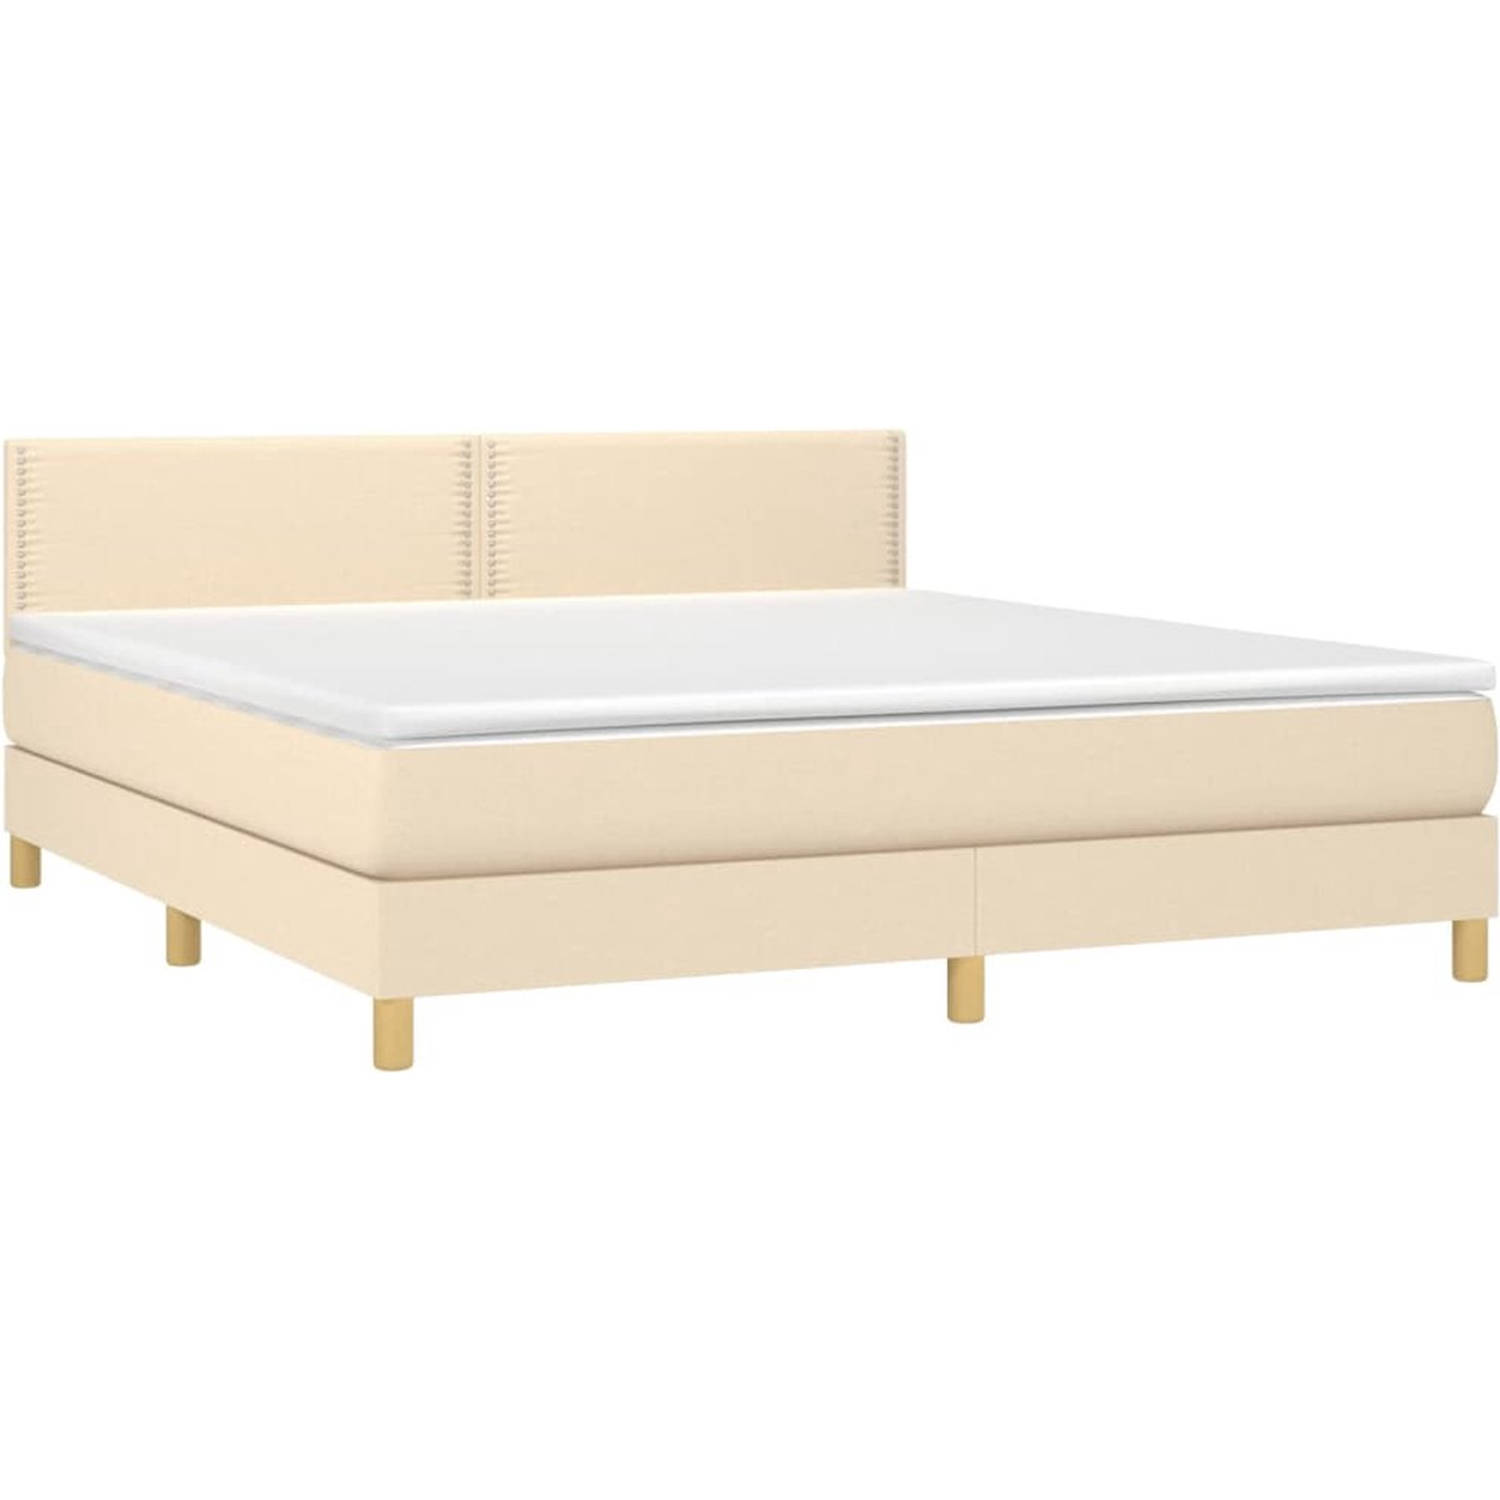 The Living Store Boxspringbed - Bed 160x200 cm - Crème/Wit